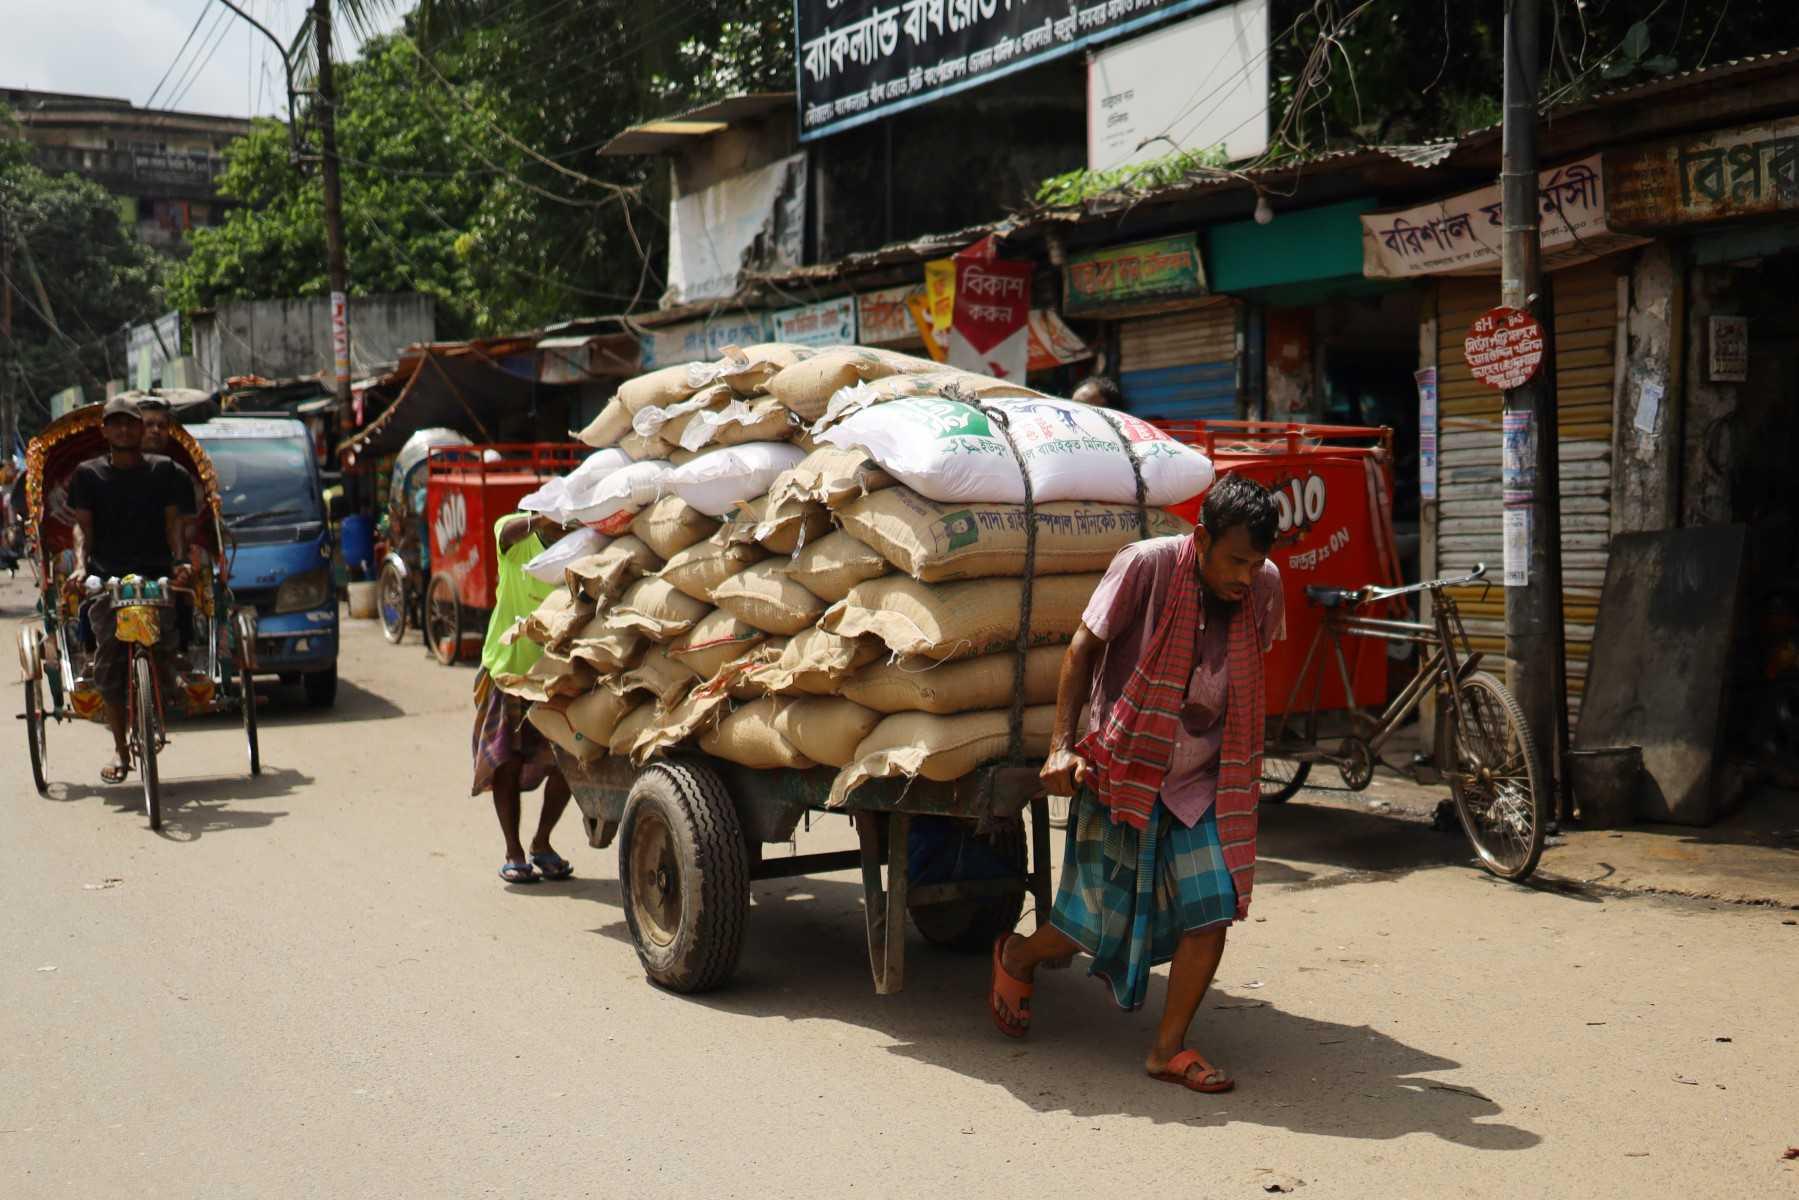 A labourer pulls a handcart loaded with sacks of grains along a street in Dhaka on June 22. Photo: AFP